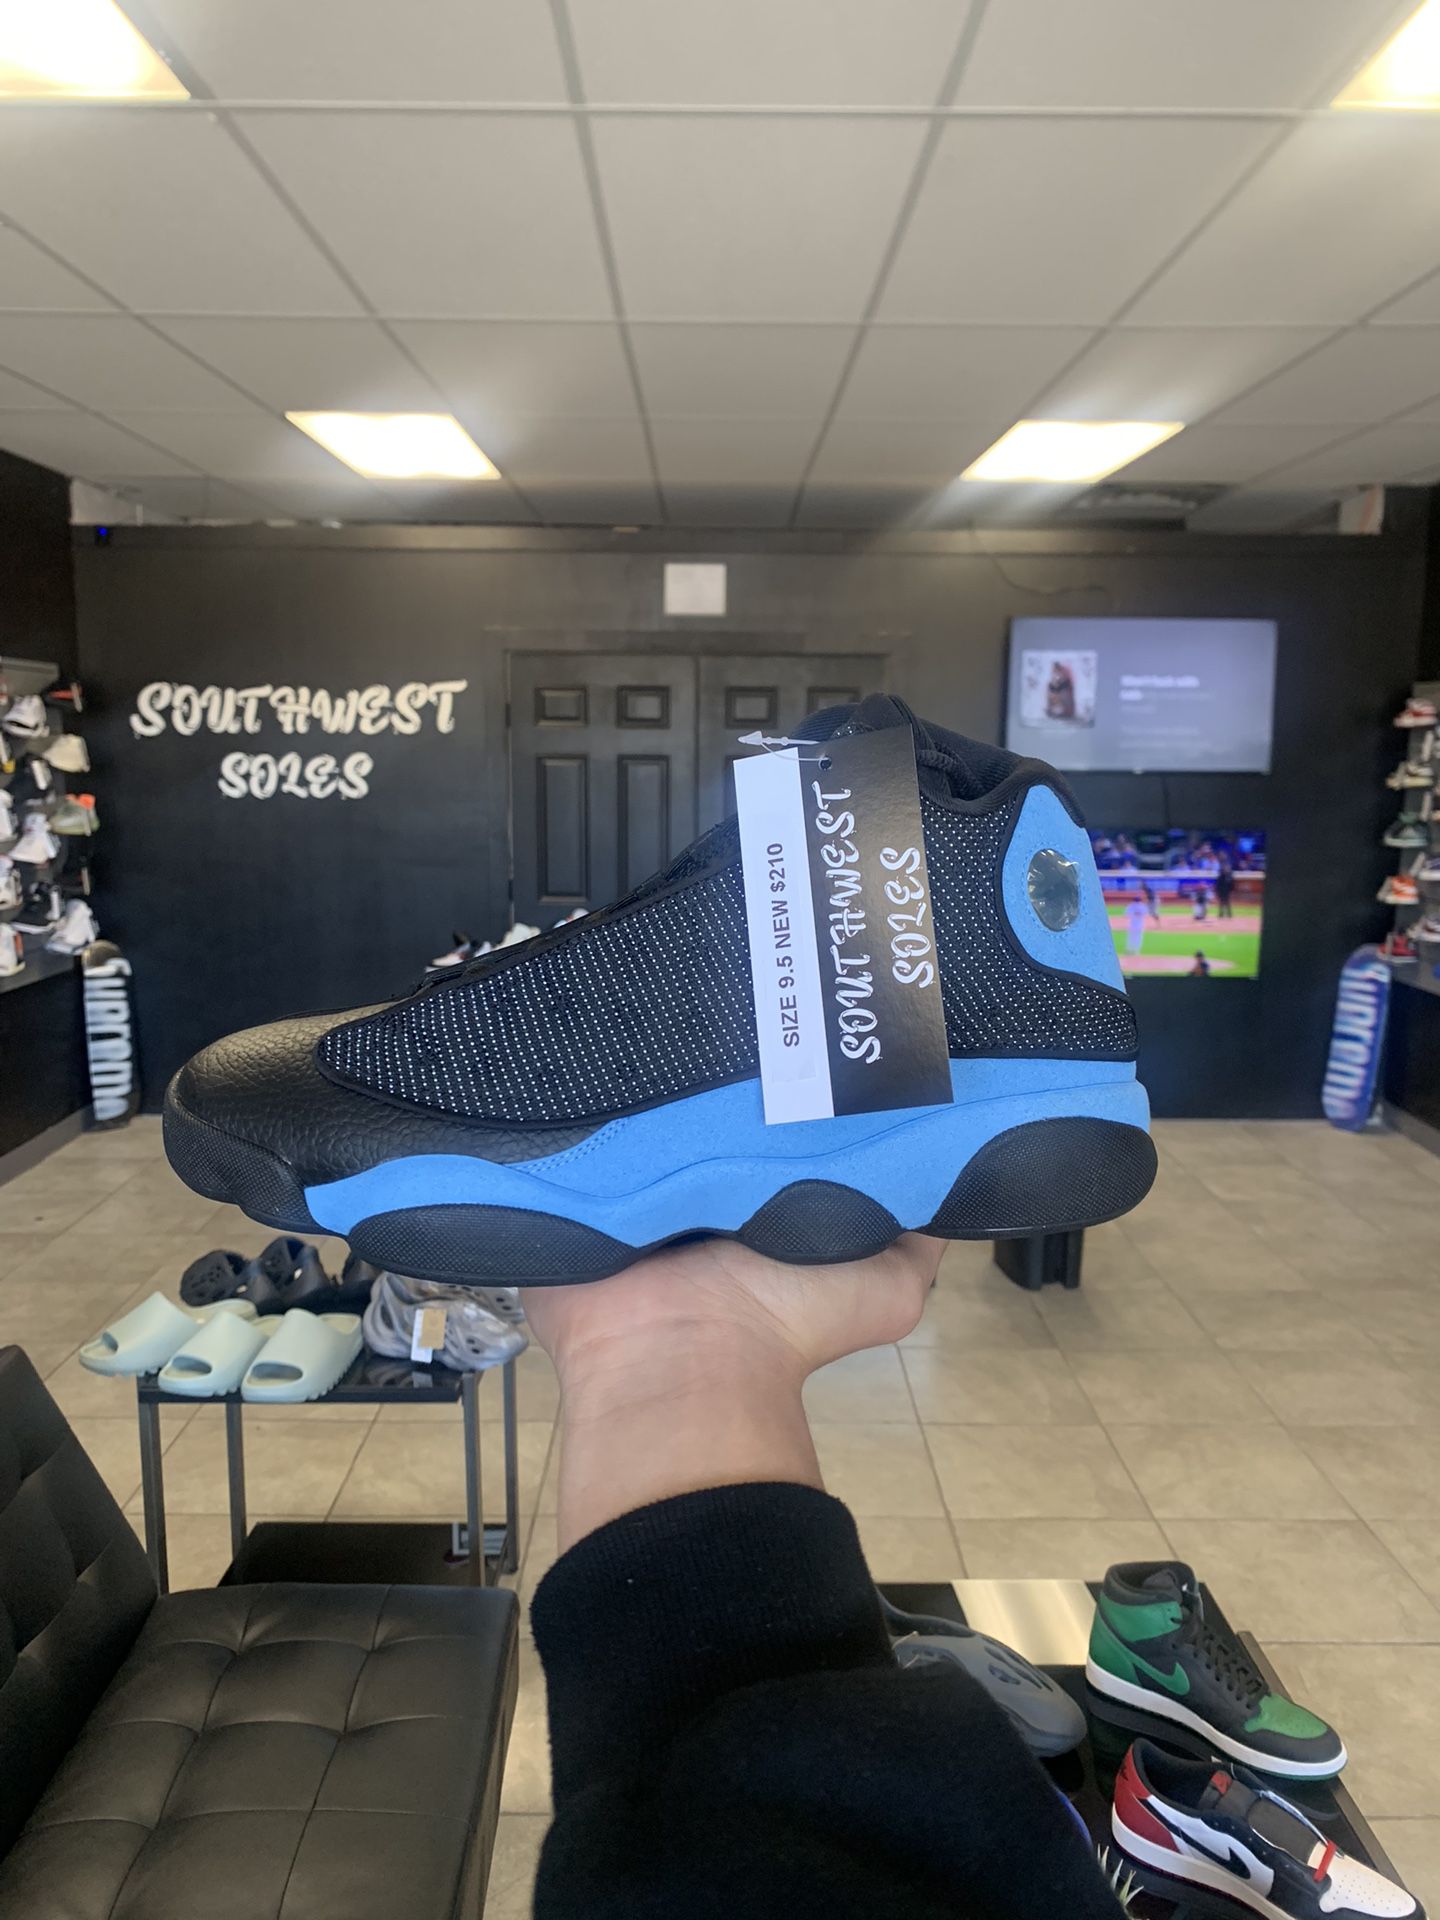 Jordan 13 Black Unc Size 9.5 Available In Store!